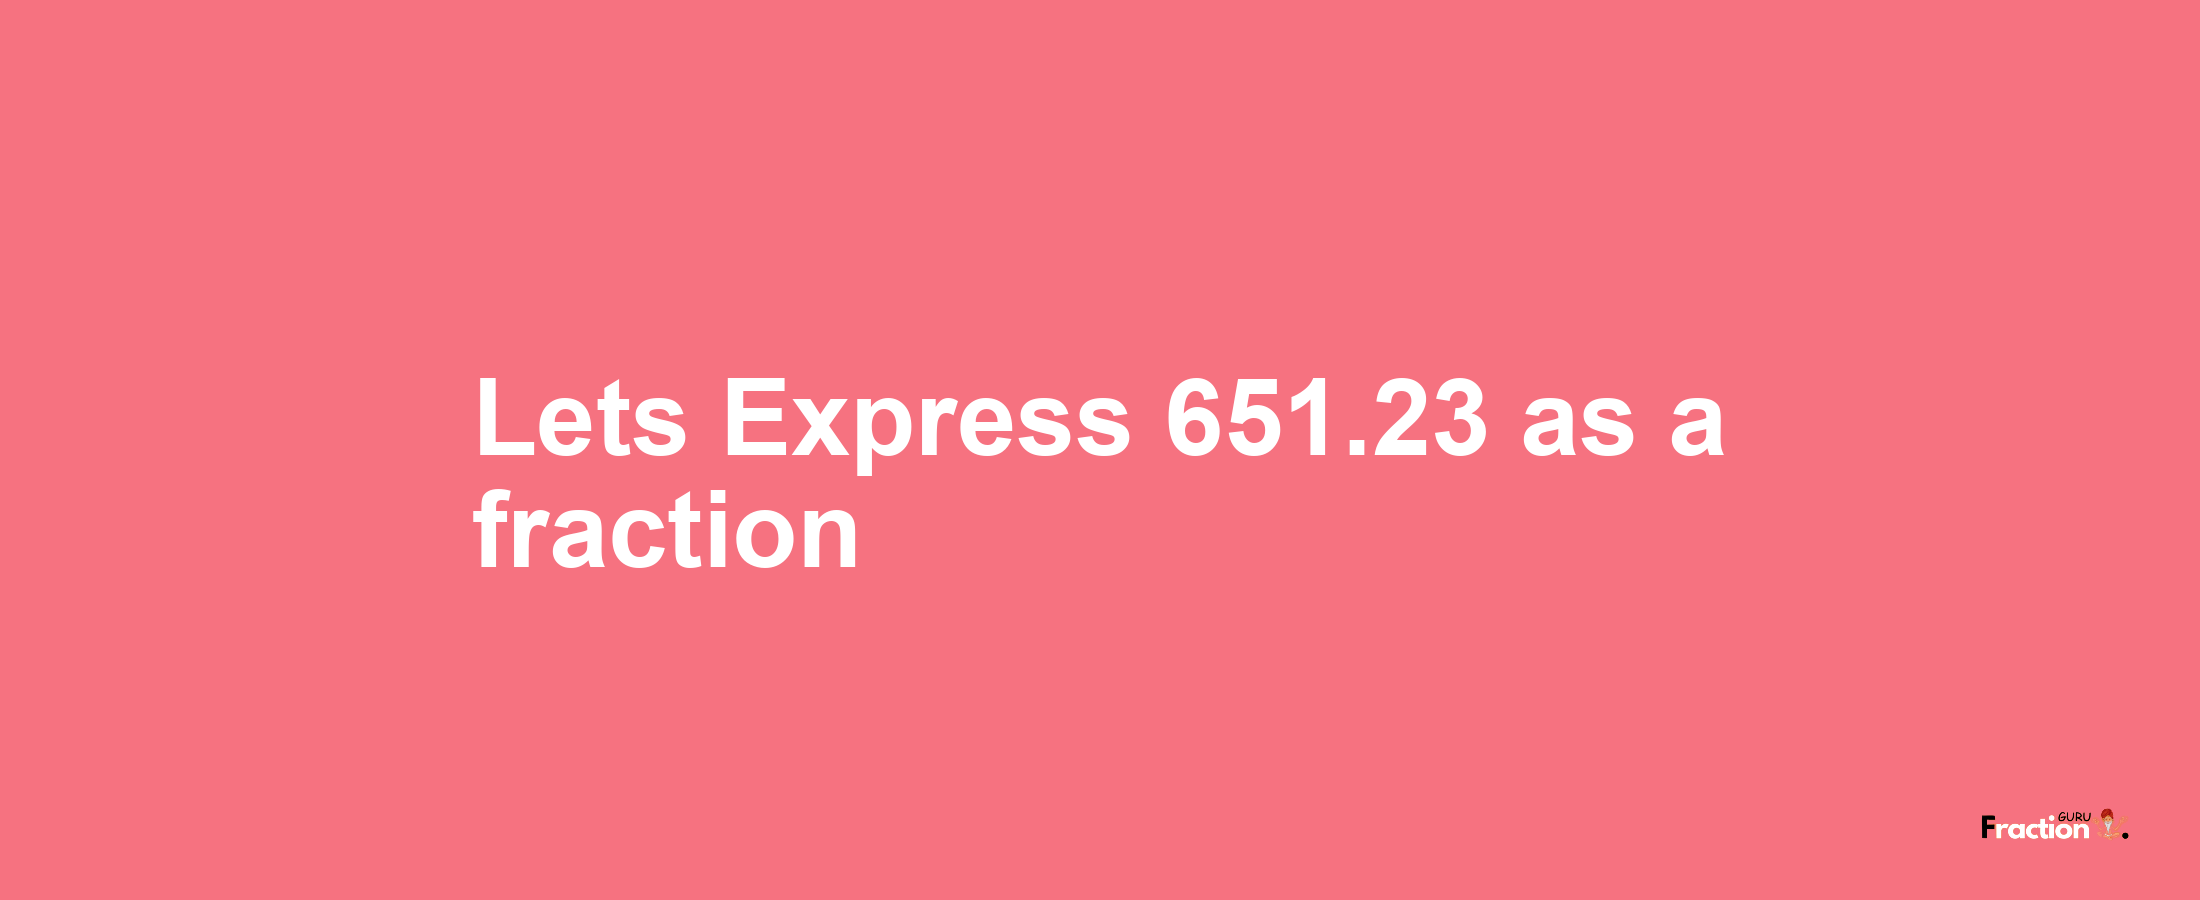 Lets Express 651.23 as afraction